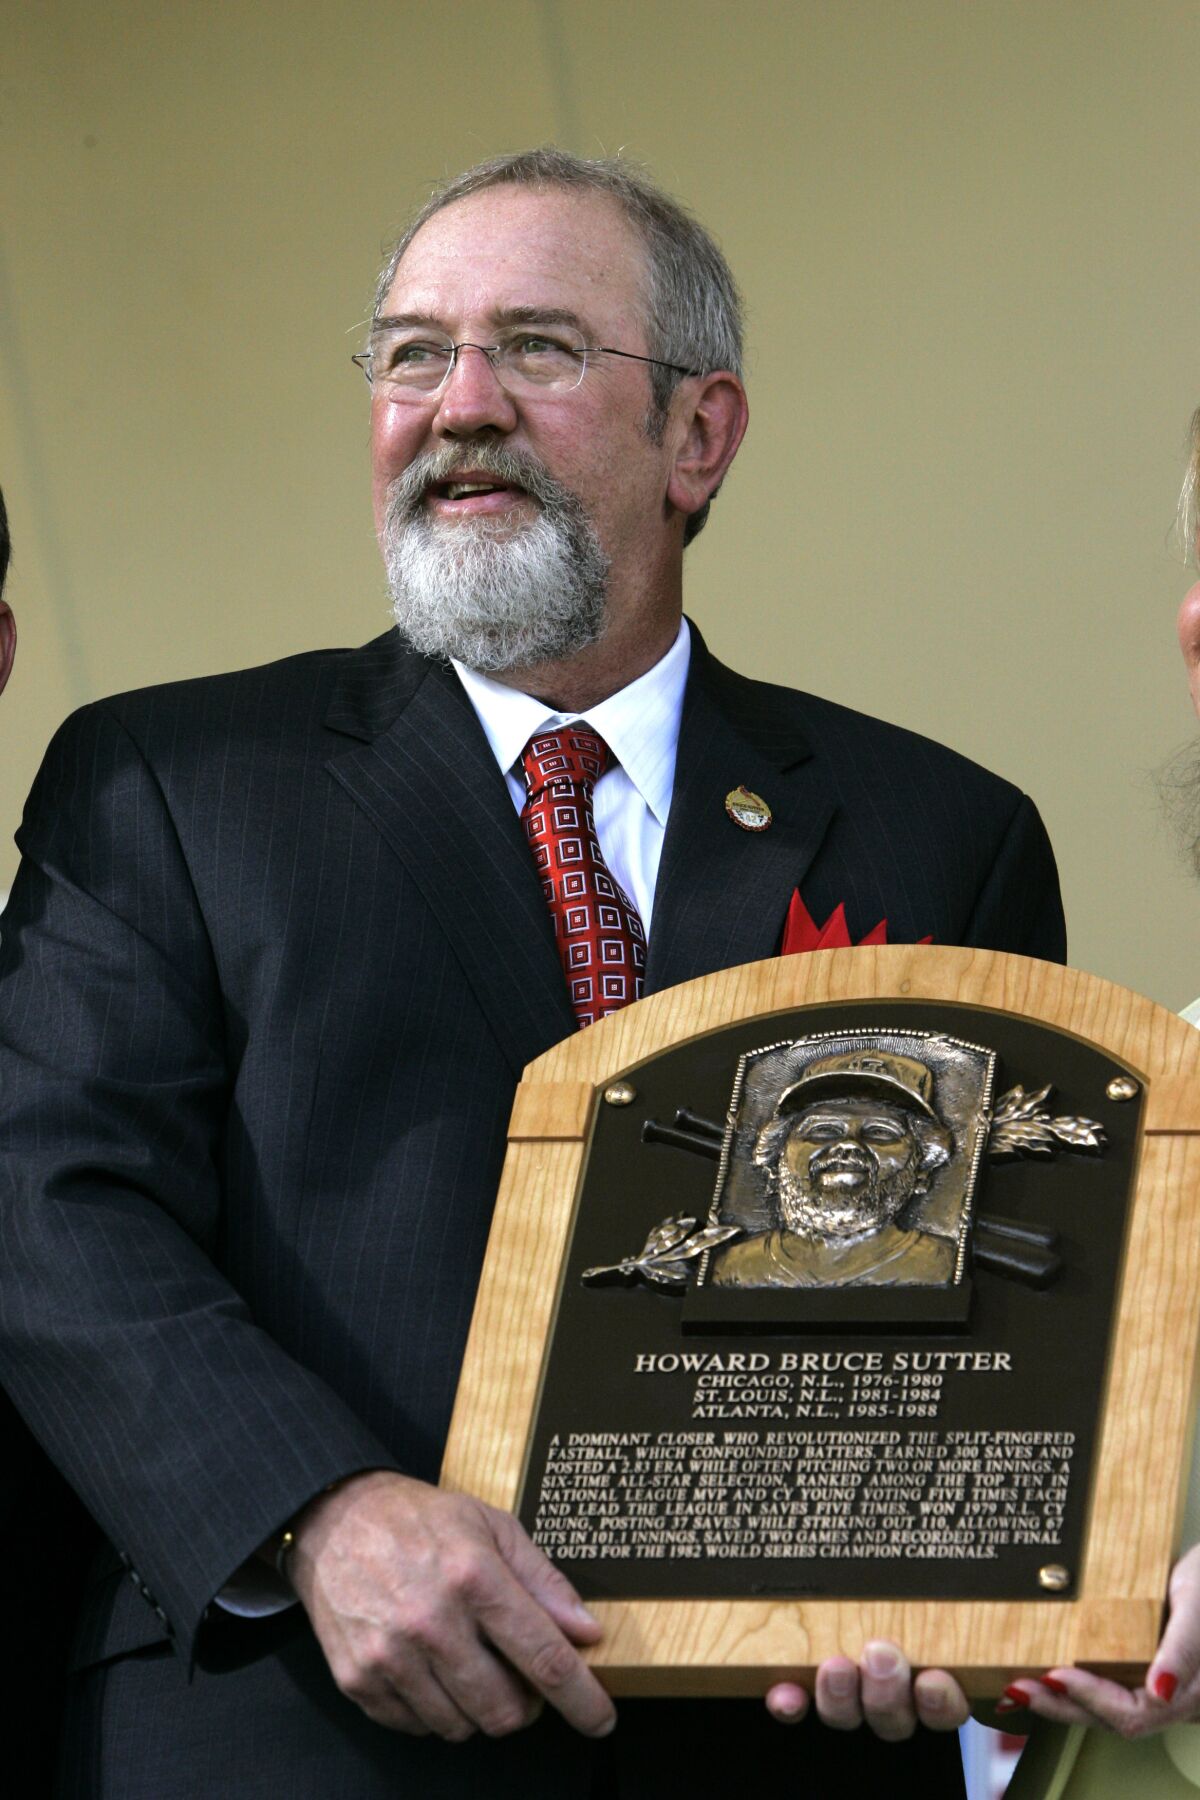 Bruce Sutter at his induction into the Hall of Fame in Cooperstown, NY in 2006.